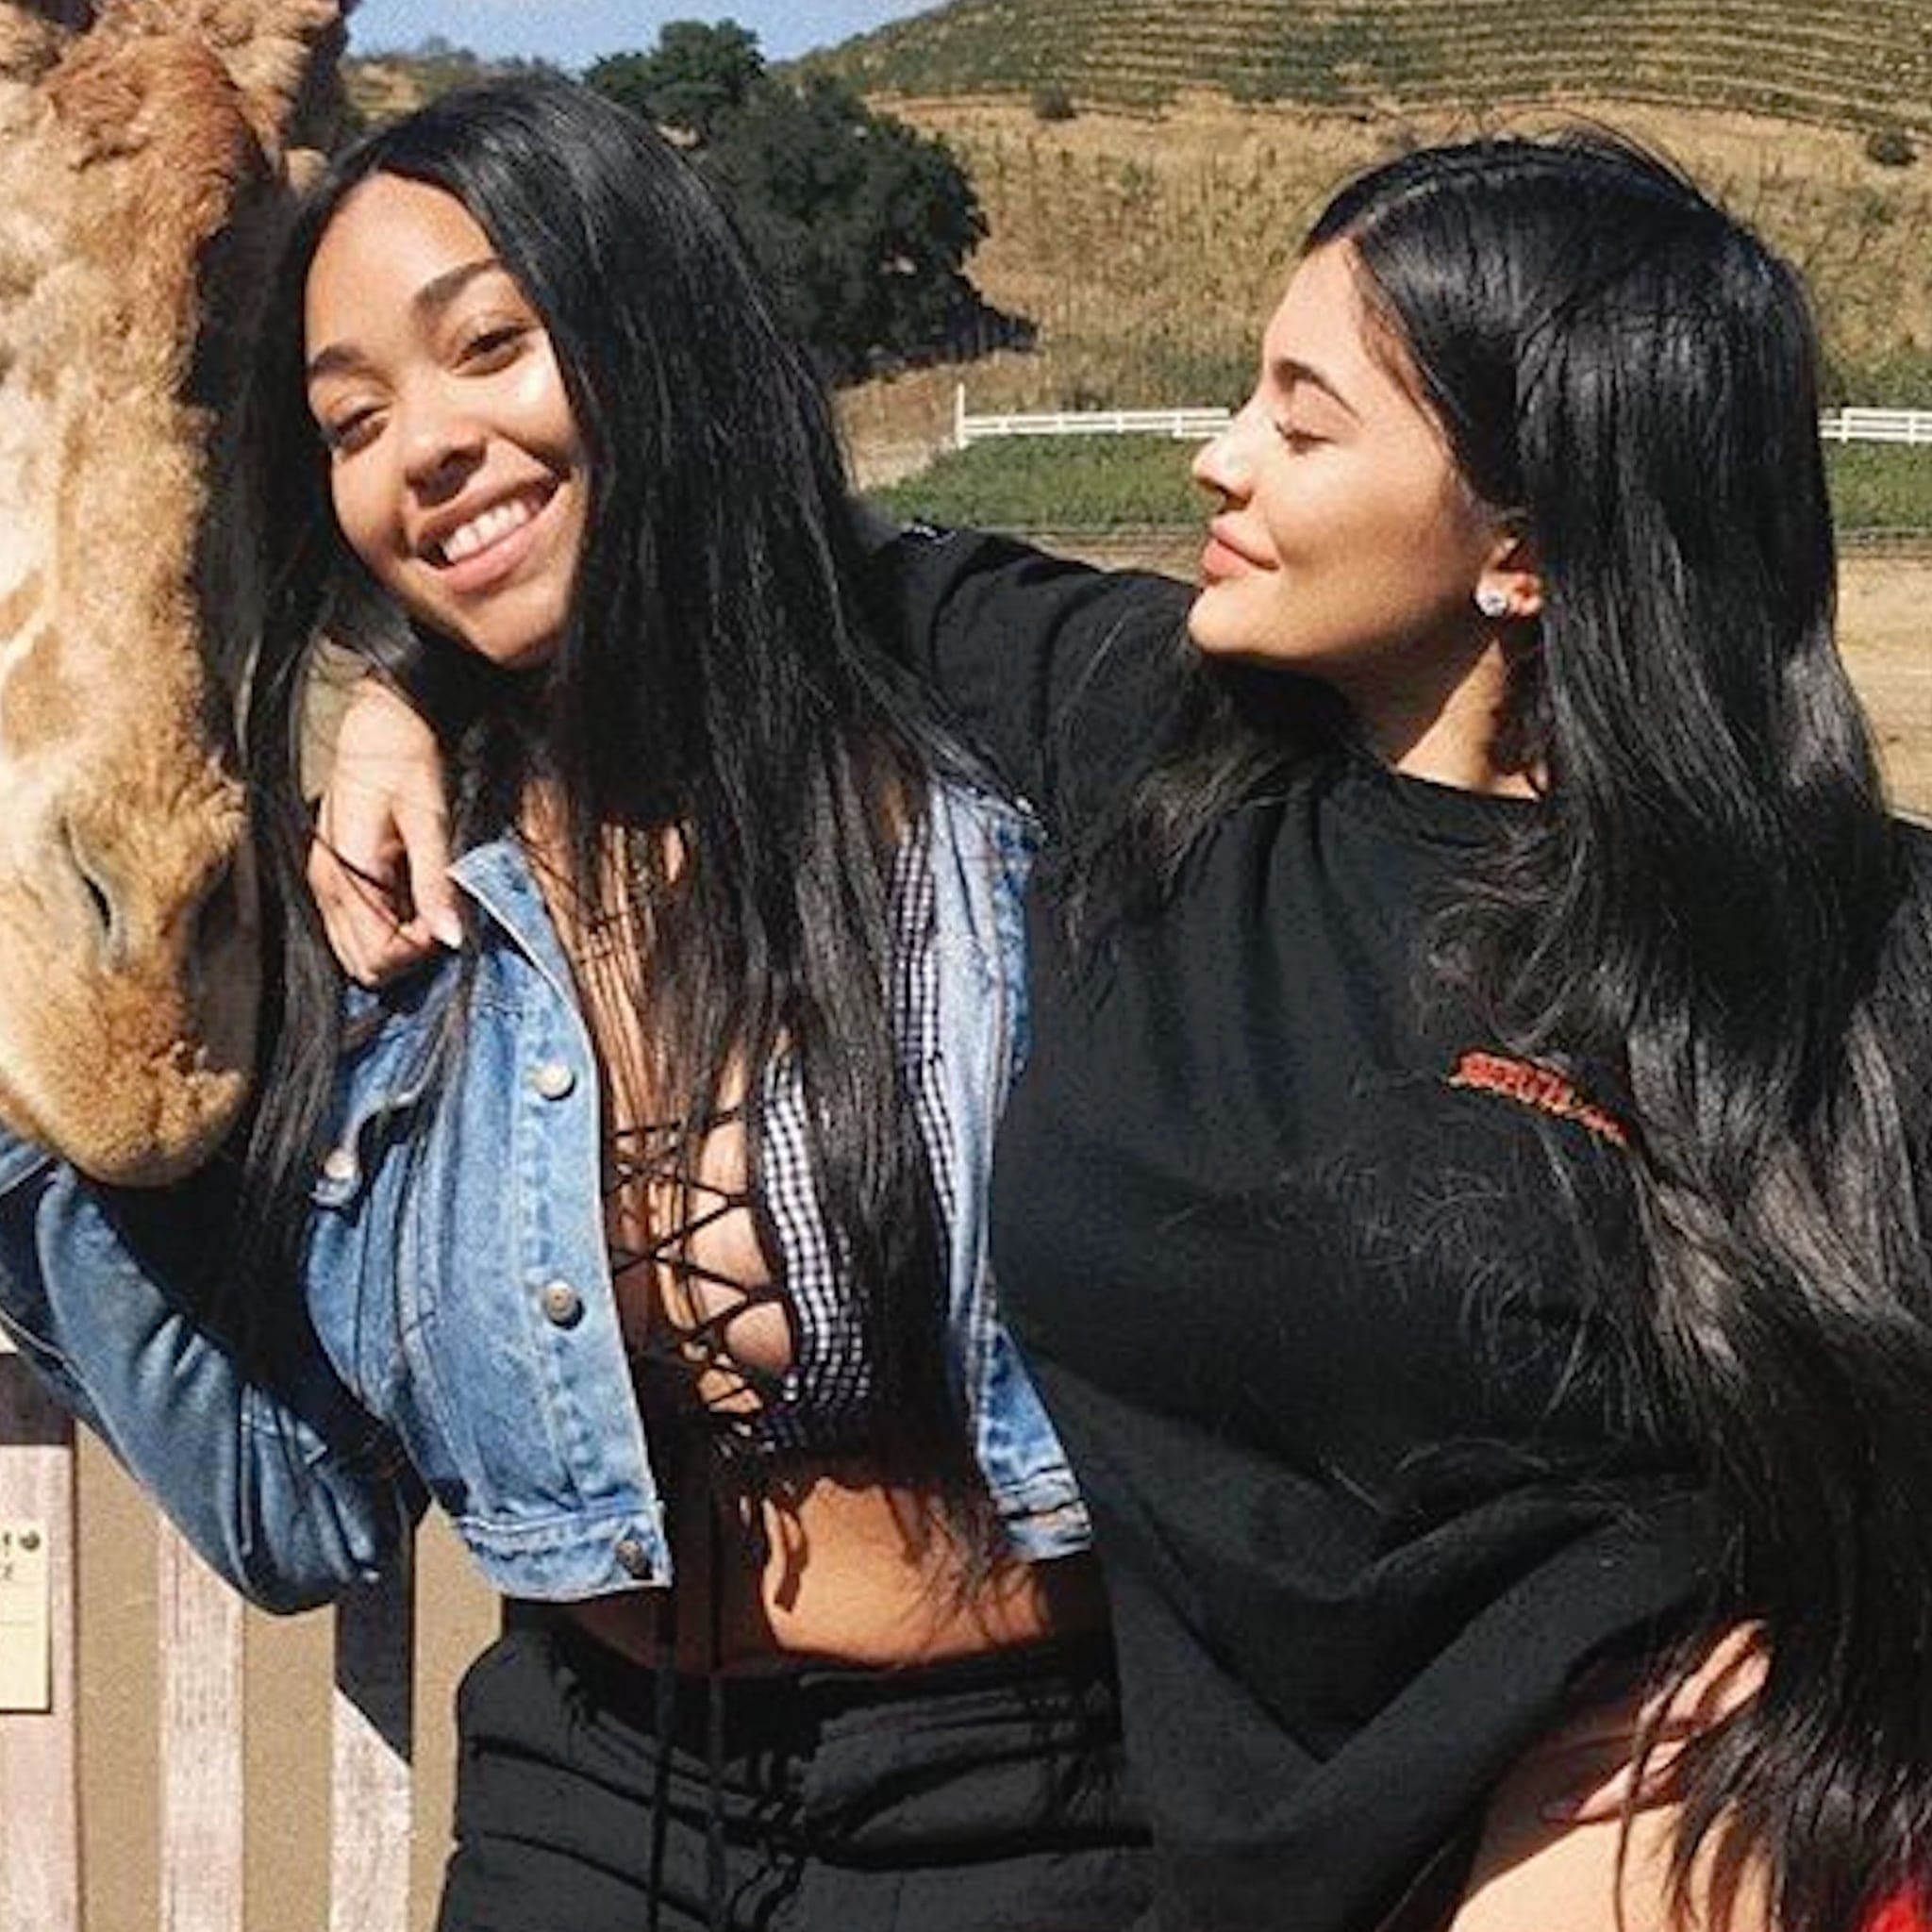 Kylie Jenner 's Fans Are Convinced She's Still Friends With Jordyn Woods 'On The Low' - Here's Why